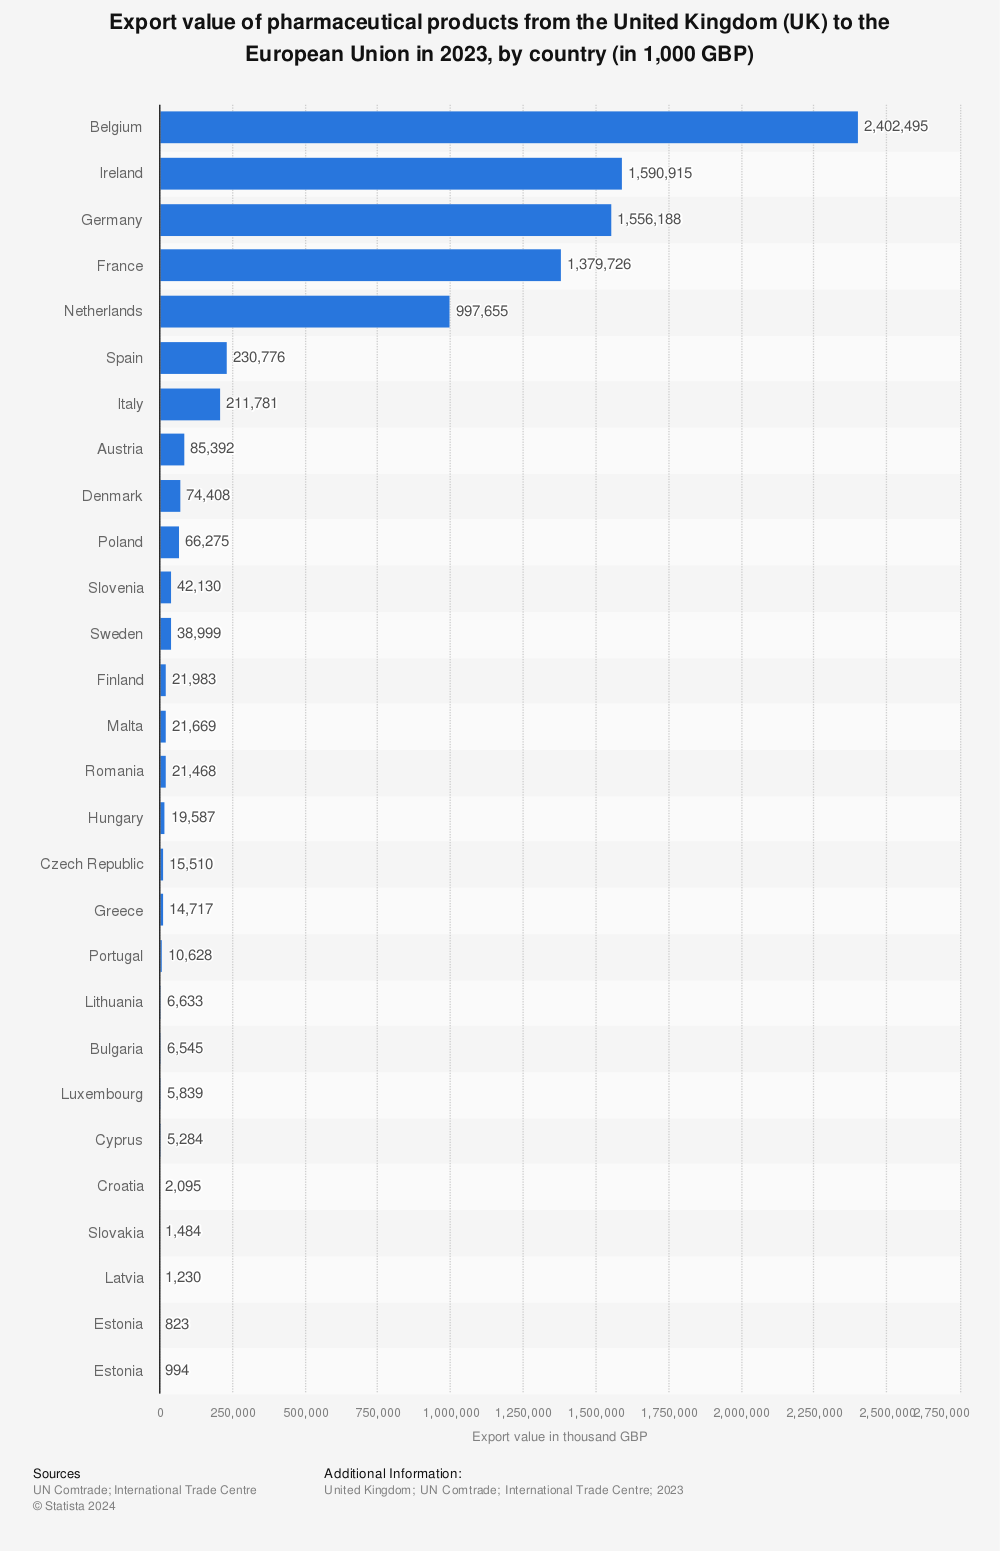 Statistic: Export value of pharmaceutical products from the United Kingdom (UK) to the European Union in 2021, by country (in 1,000 GBP) | Statista